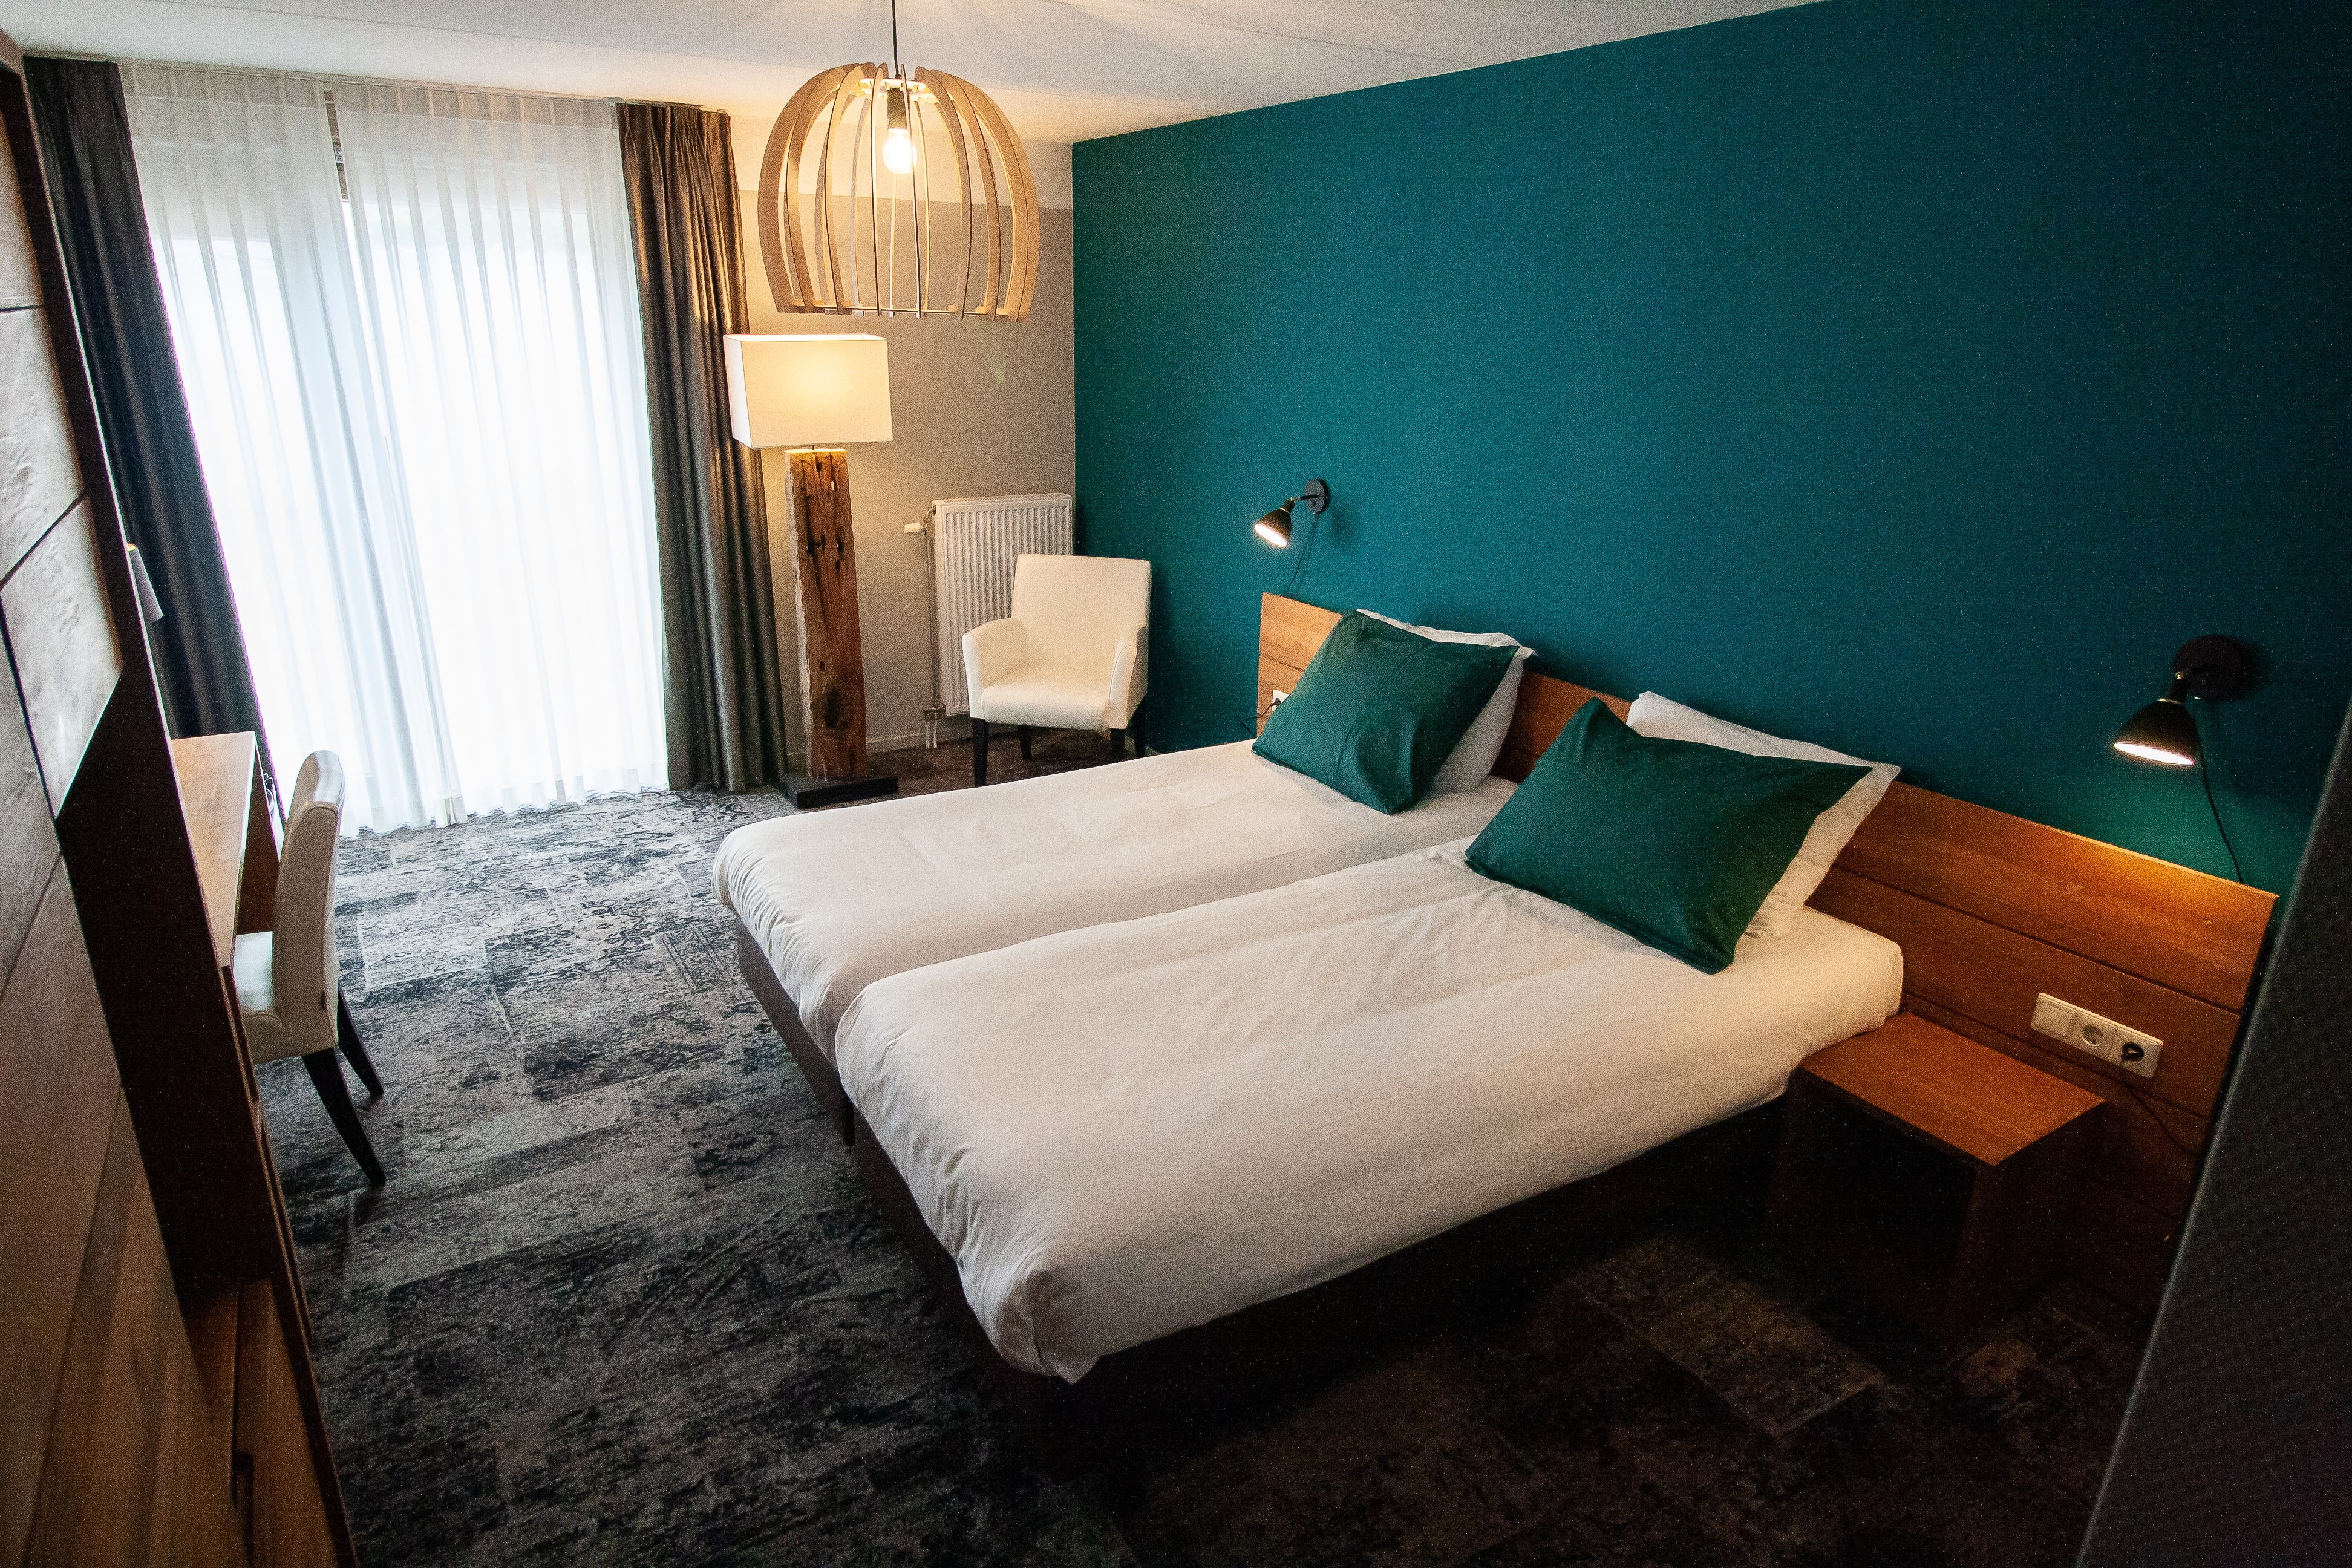 Linge Hotel Elst <br/>63.33 ew <br/> <a href='http://vakantieoplossing.nl/outpage/?id=f5d16e63b8c3729e931db133e7e3546b' target='_blank'>View Details</a>